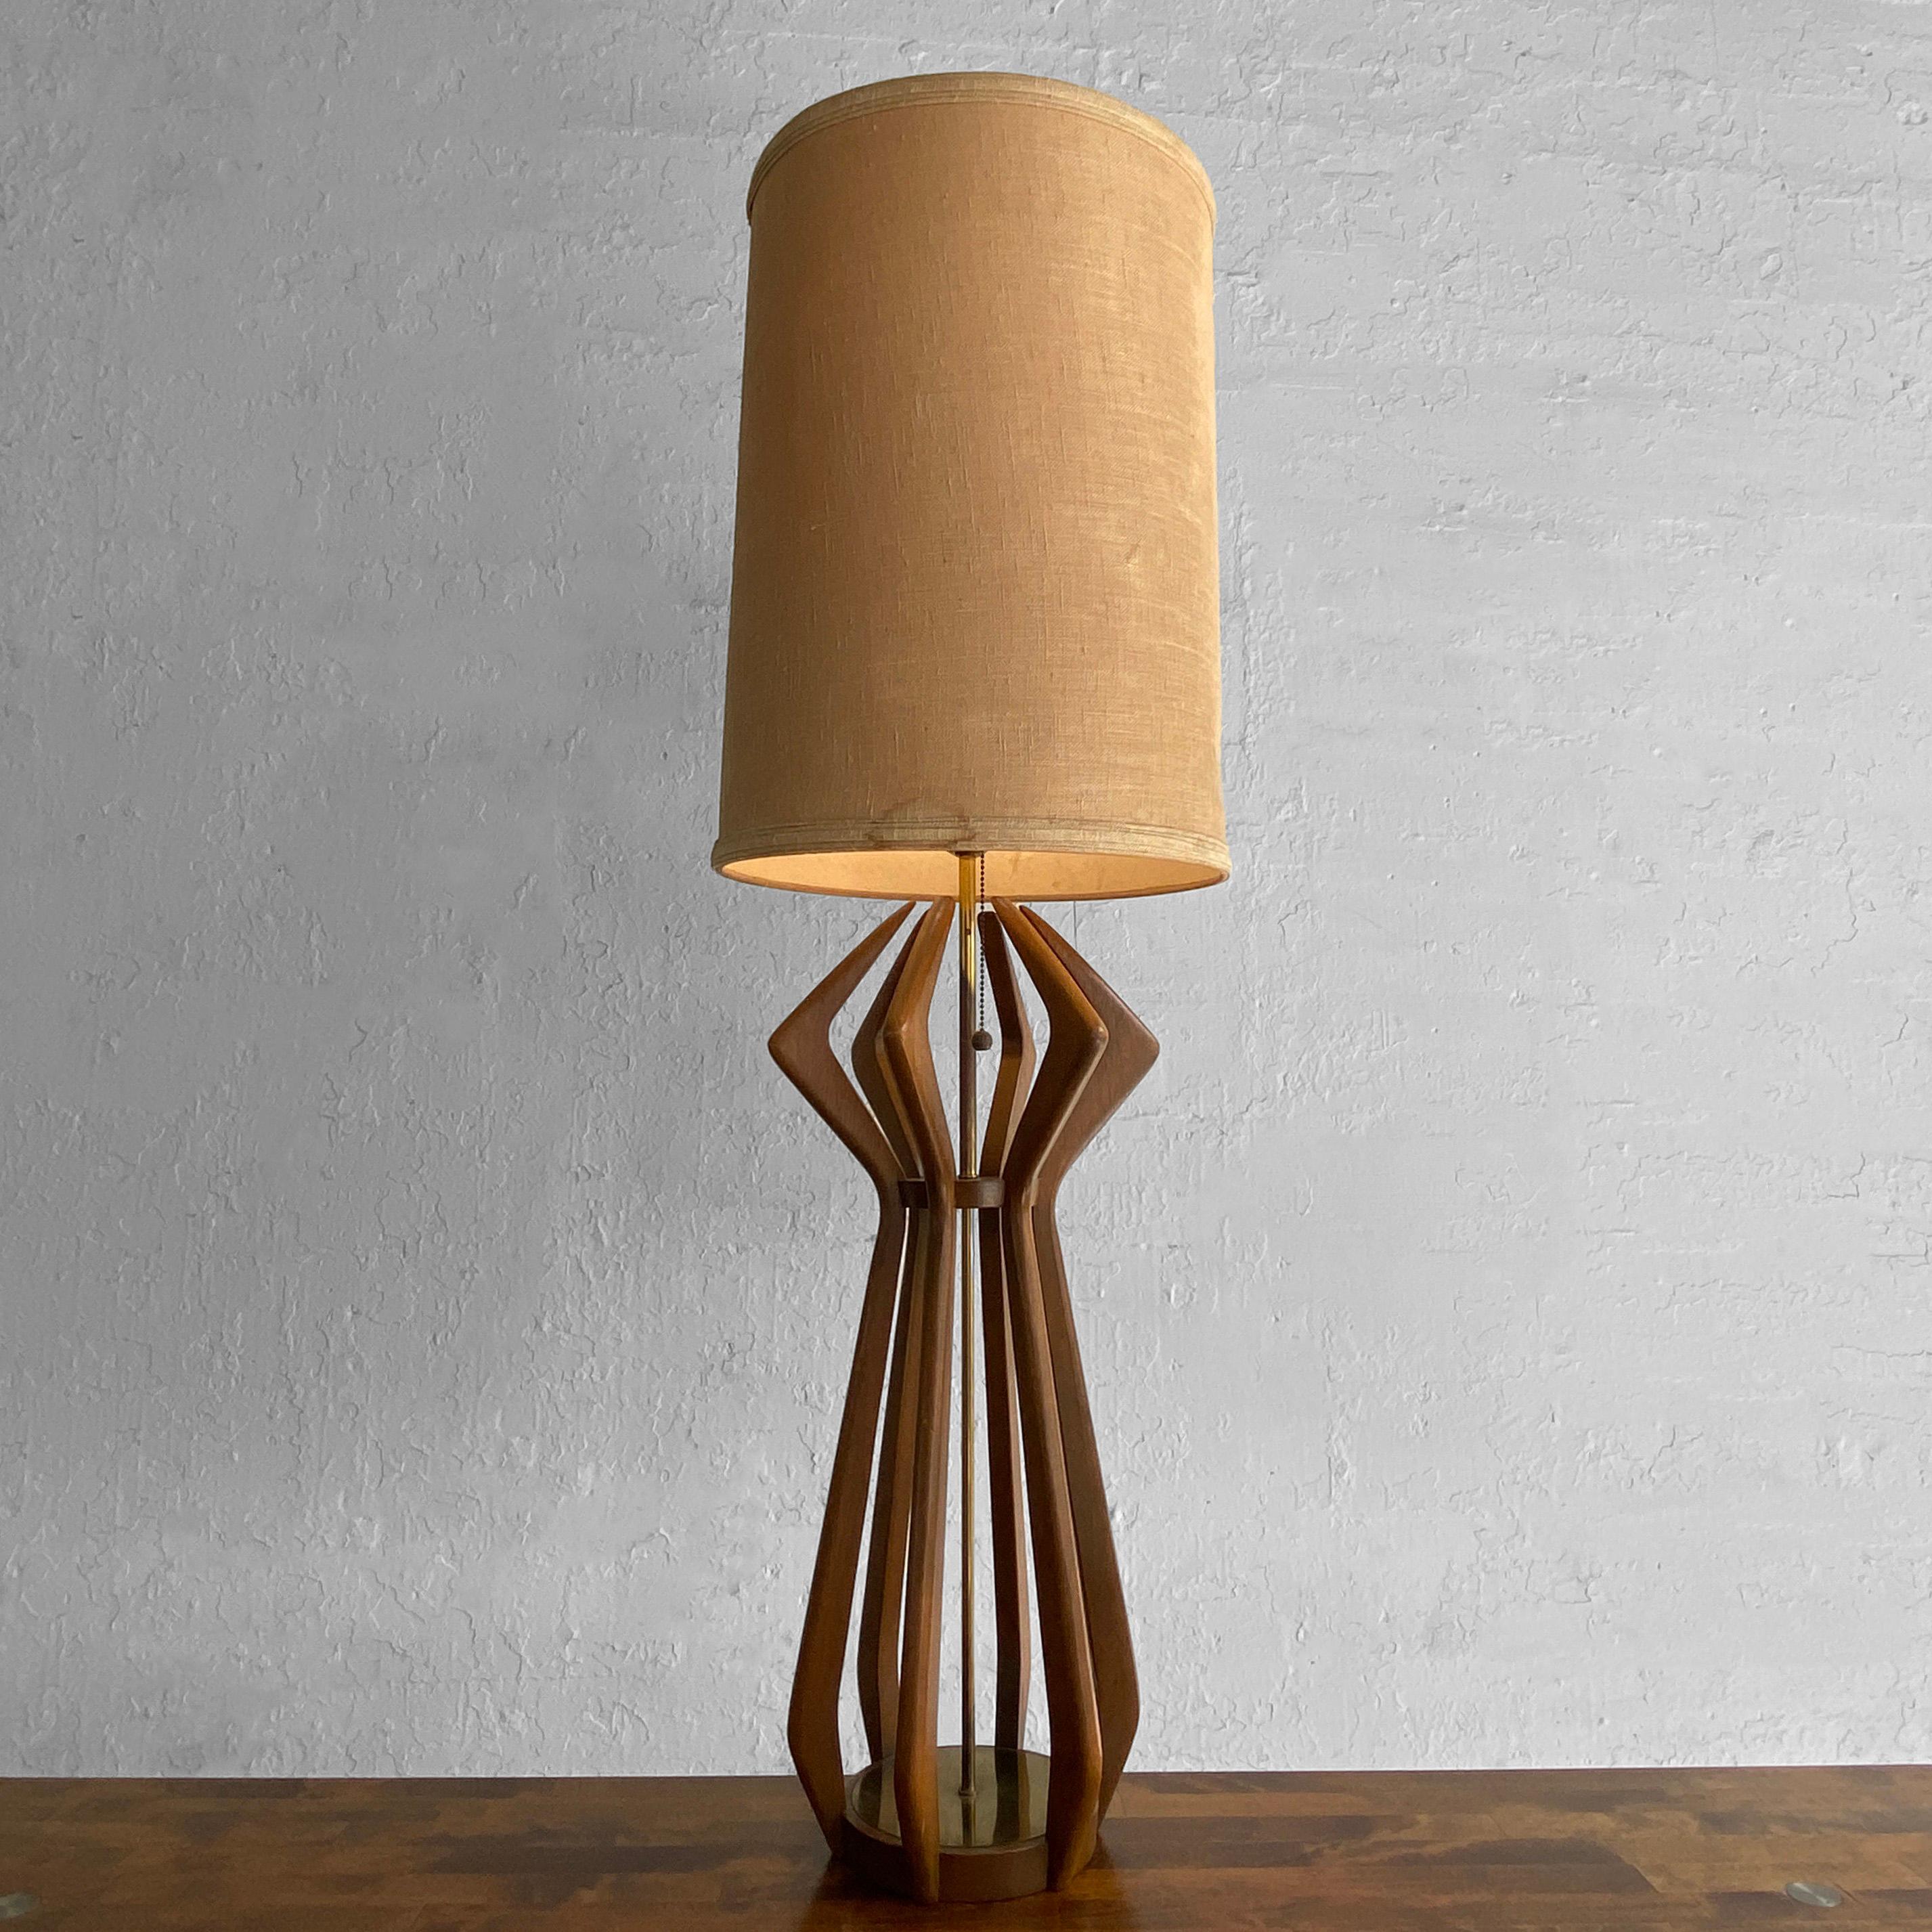 Statuesque, Mid-Century Modern table lamp by Modeline features a segmented, sculptural walnut body with brass accents reminiscent of Adrian Pearsall's work.